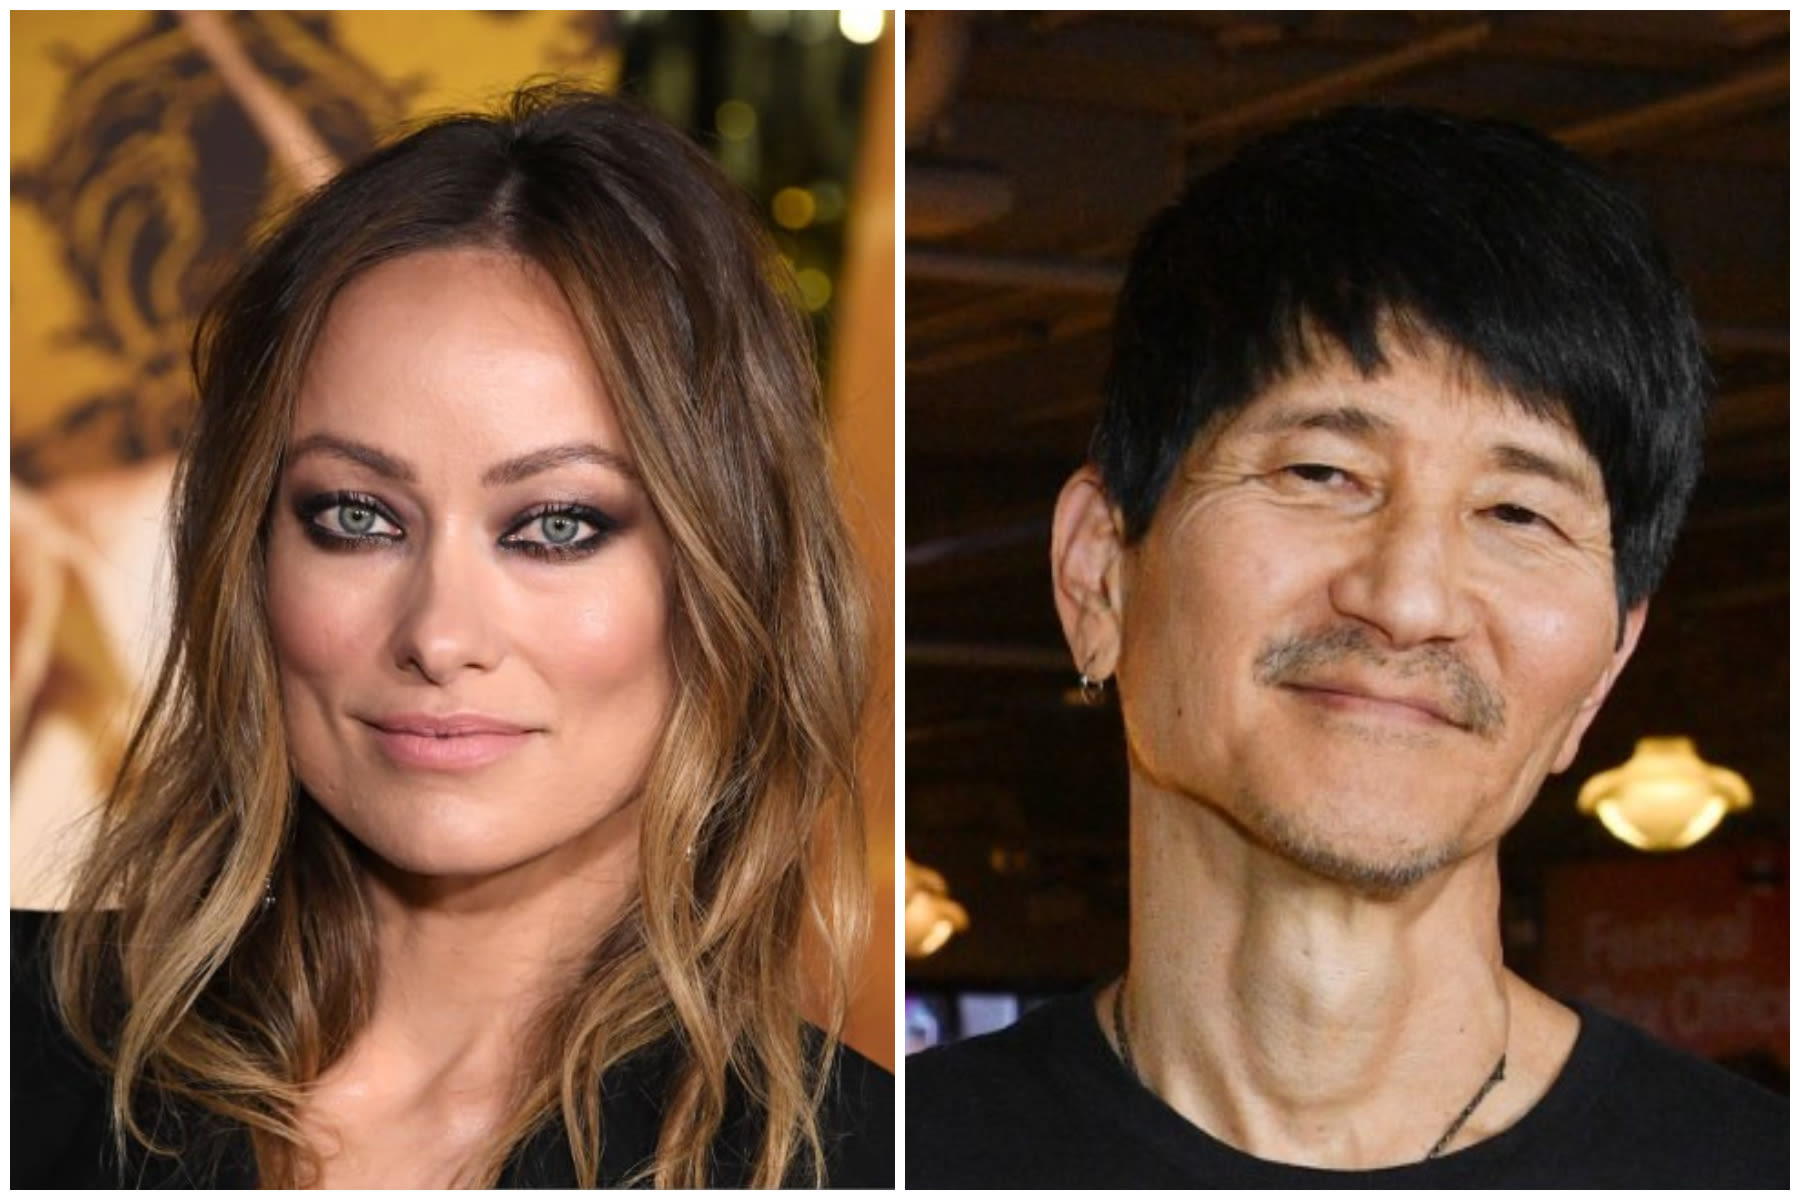 Olivia Wilde to Star in Thriller ‘I Want Your Sex’ From Director Gregg Araki